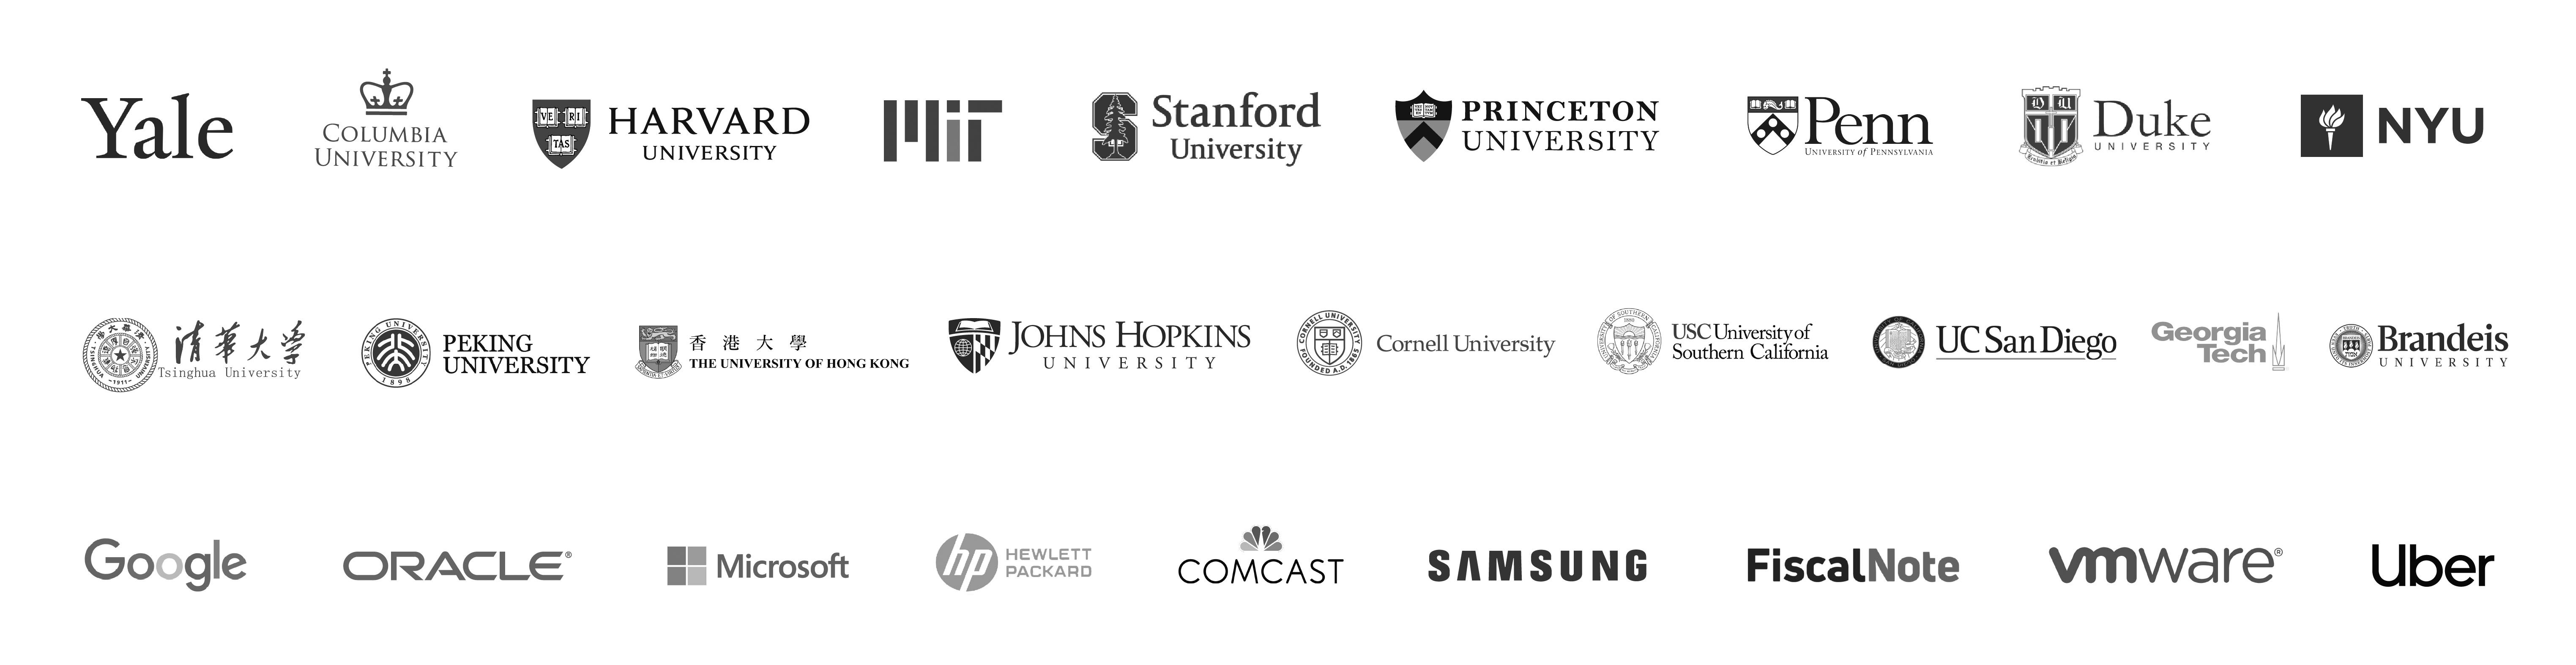 Logos of Schools and Companies